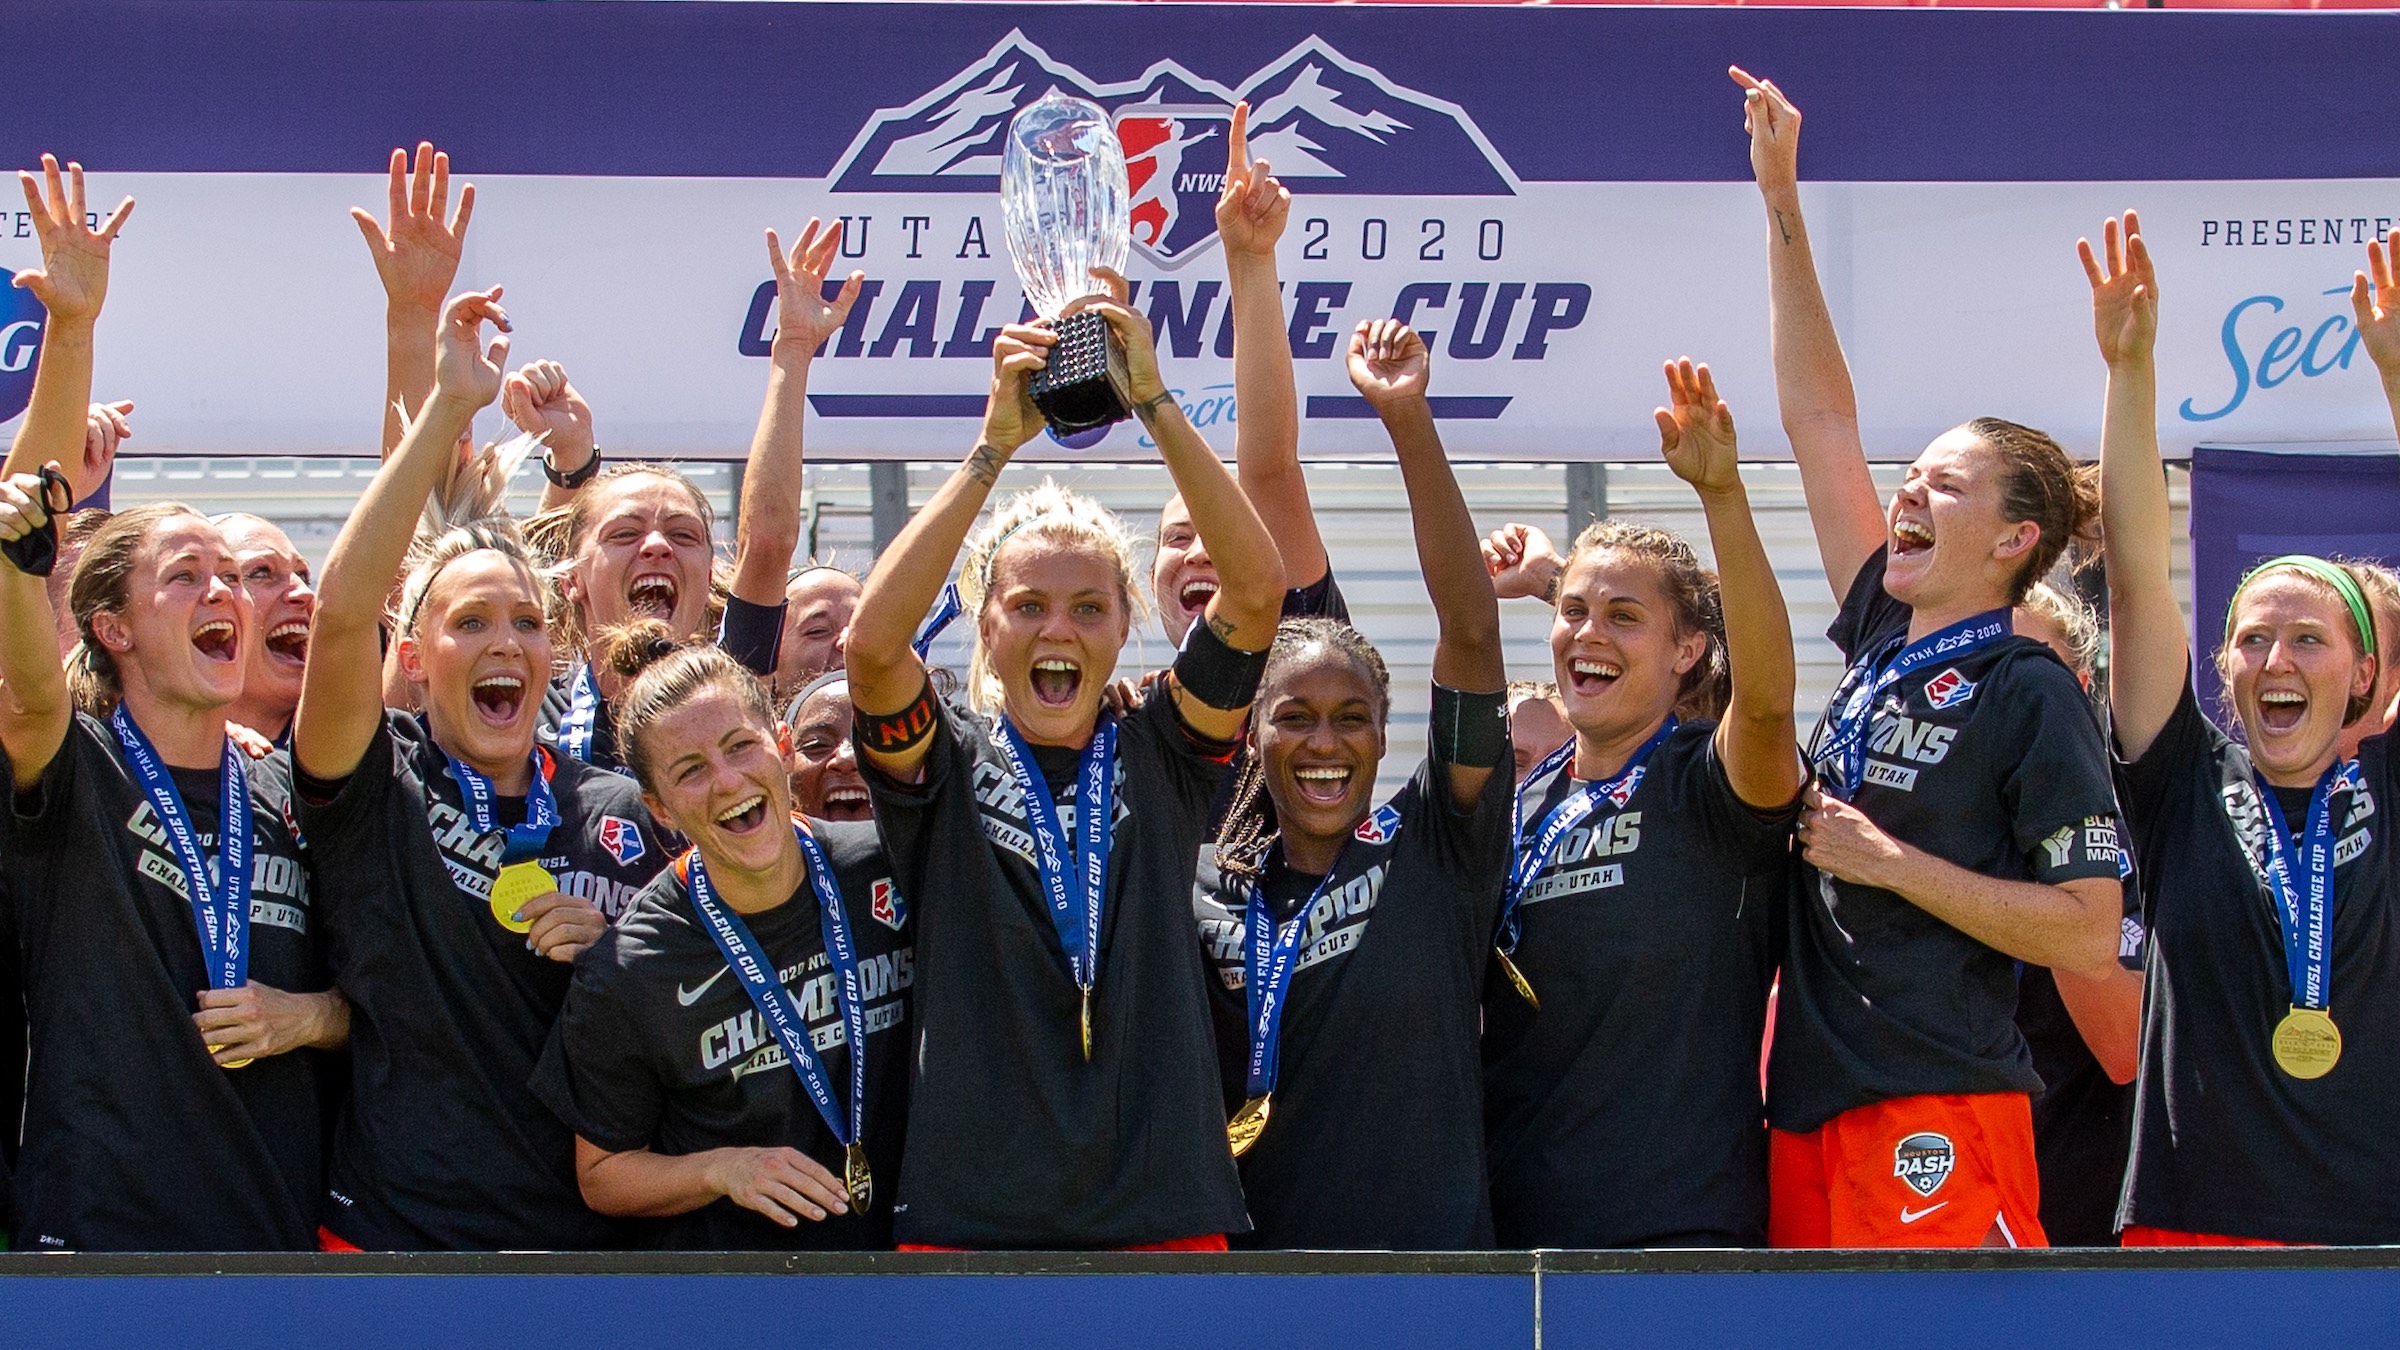 nwsl challenge cup